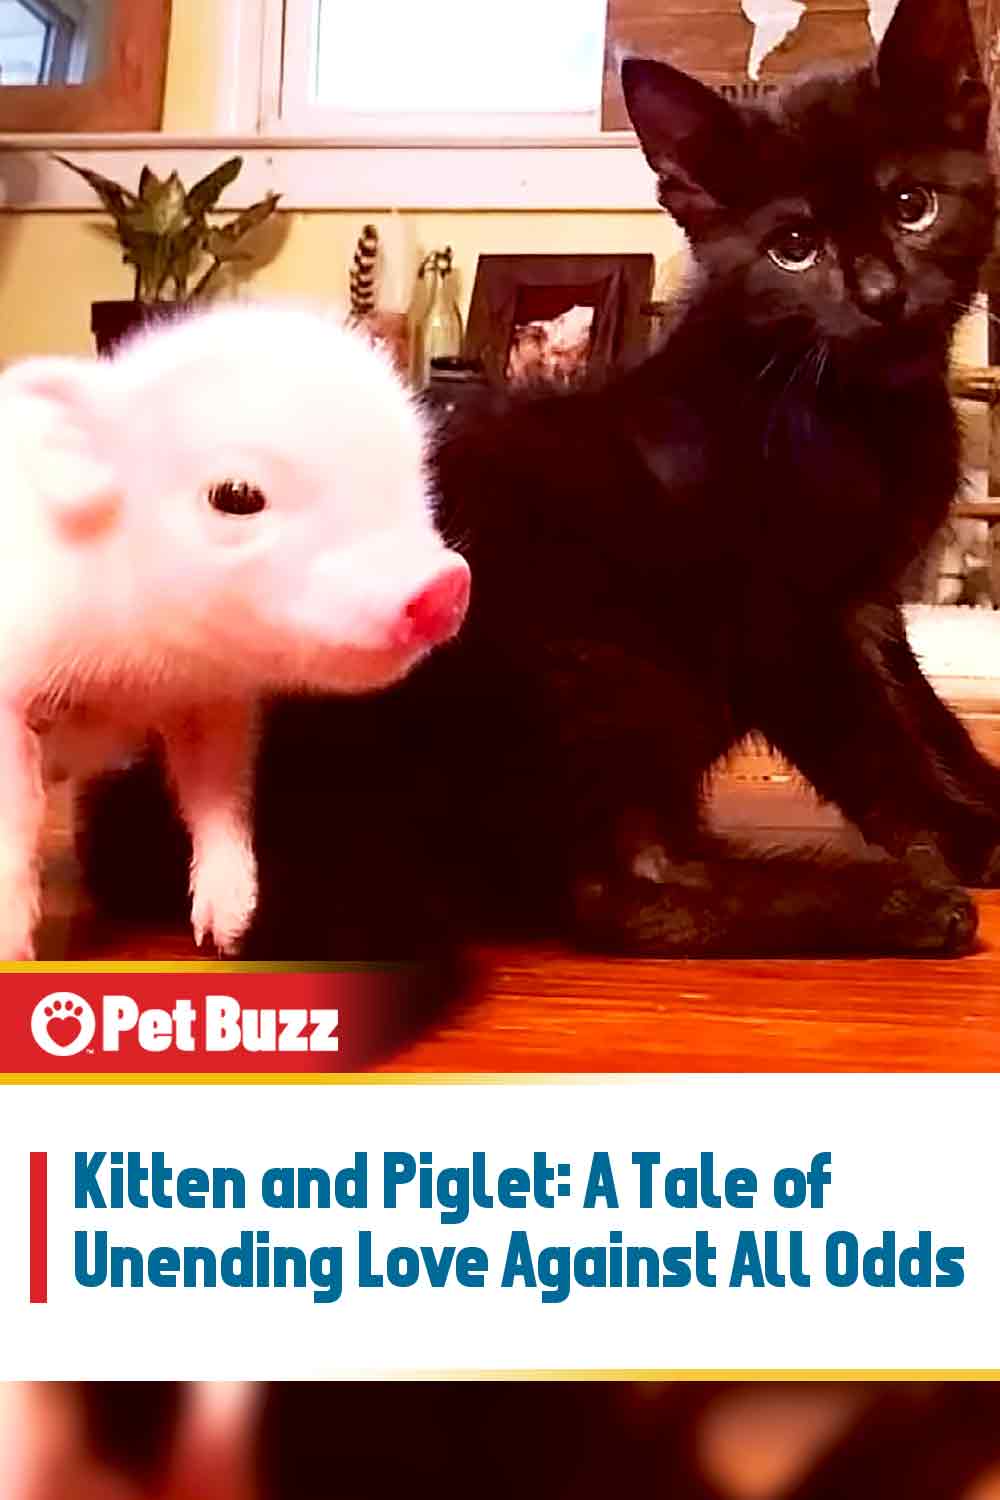 Kitten and Piglet: A Tale of Unending Love Against All Odds